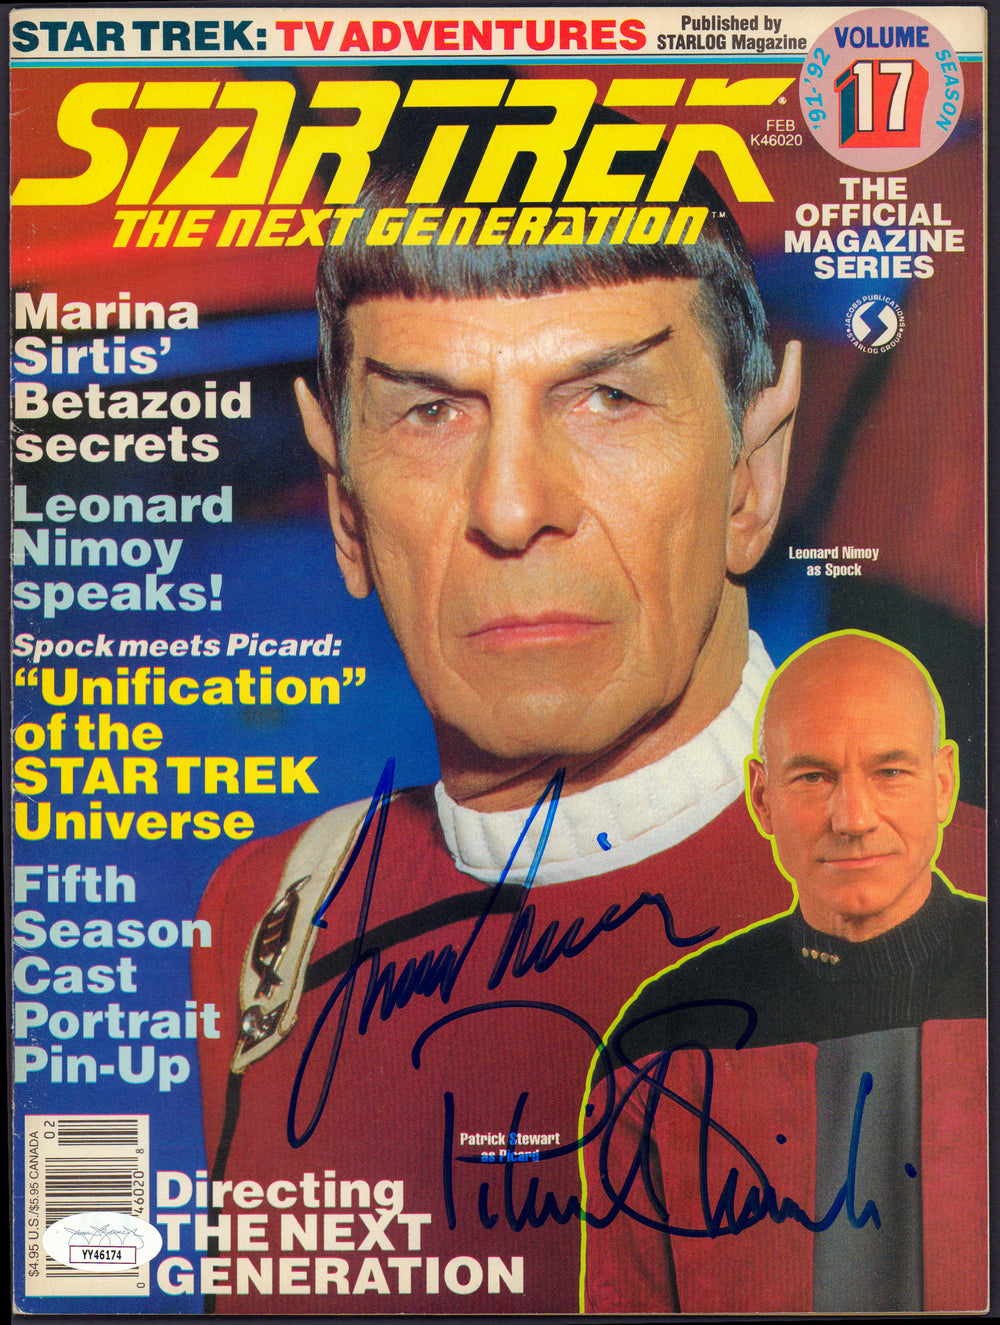 Leonard Nimoy as Spock and Patrick Stewart as Captain Jean-Luc Picard in Star Trek: The Next Generation Signed Magazine